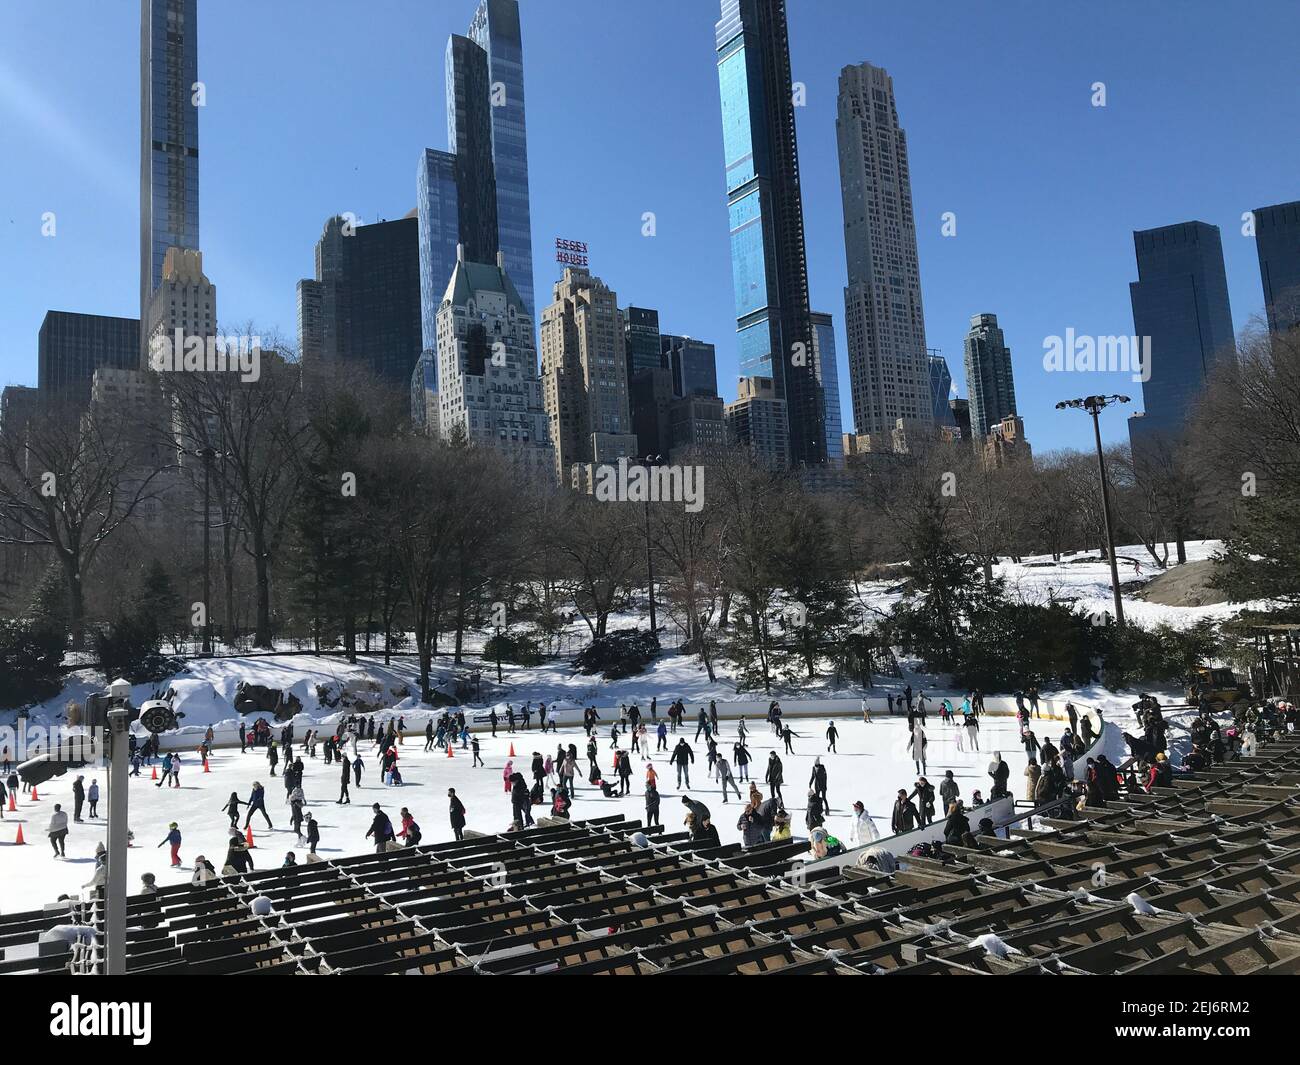 New York, United States. 21st Feb, 2021. People are seen ice skating on Wollman Ice Rinks' at Central Park in New York City on its final day of operation on February 21, 2021. It comes after the city announced it would sever its contracts early with the Trump Organization, following the Capitol riots last month. (Photo by Ryan Rahman/Pacific Press) Credit: Pacific Press Media Production Corp./Alamy Live News Stock Photo